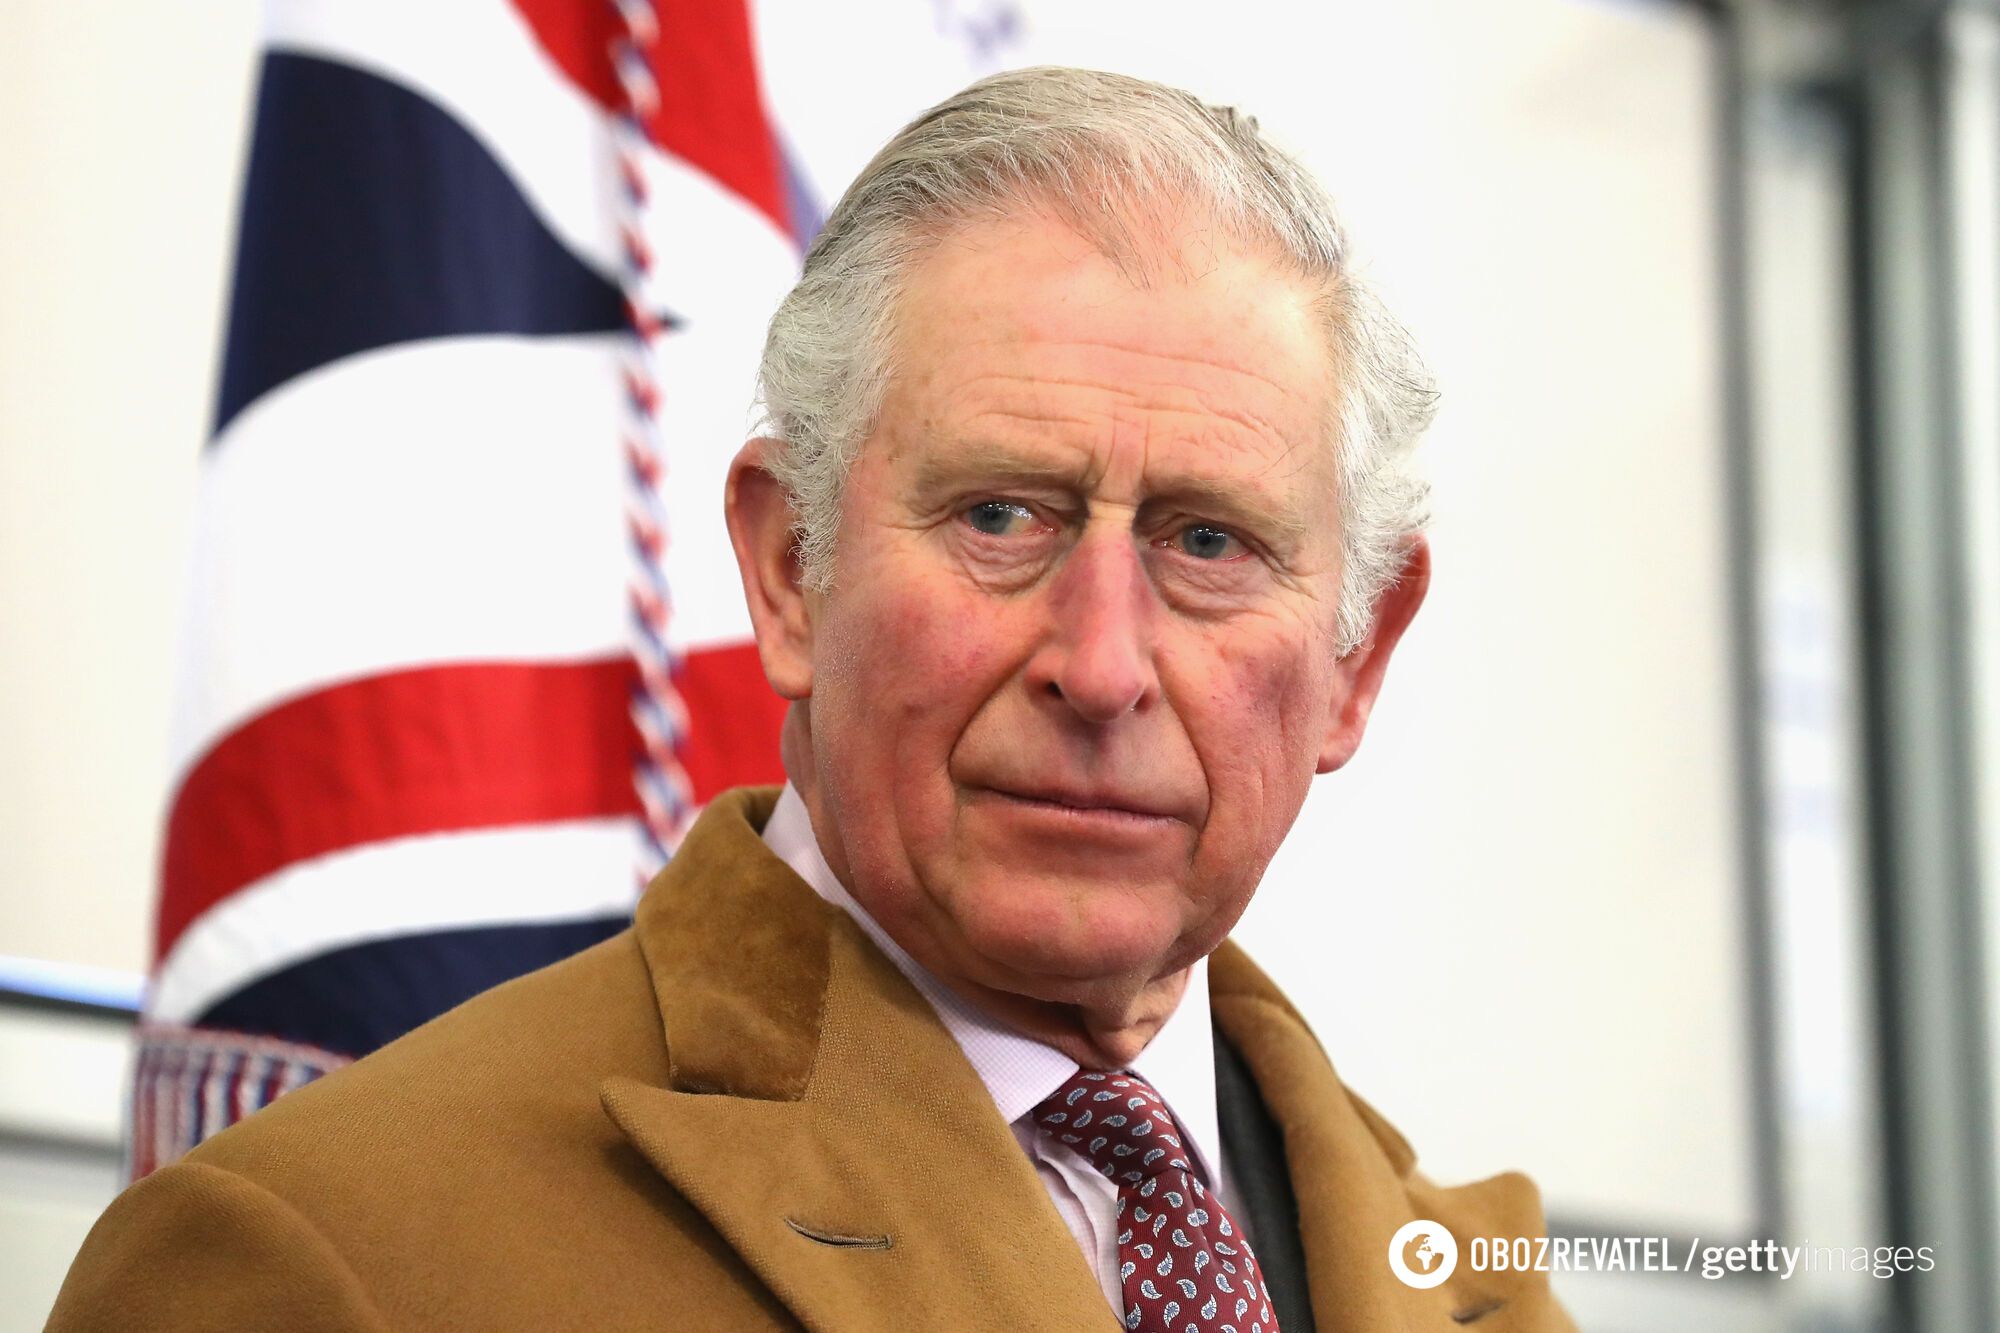 King Charles III goes to hospital with a benign tumor: what is known